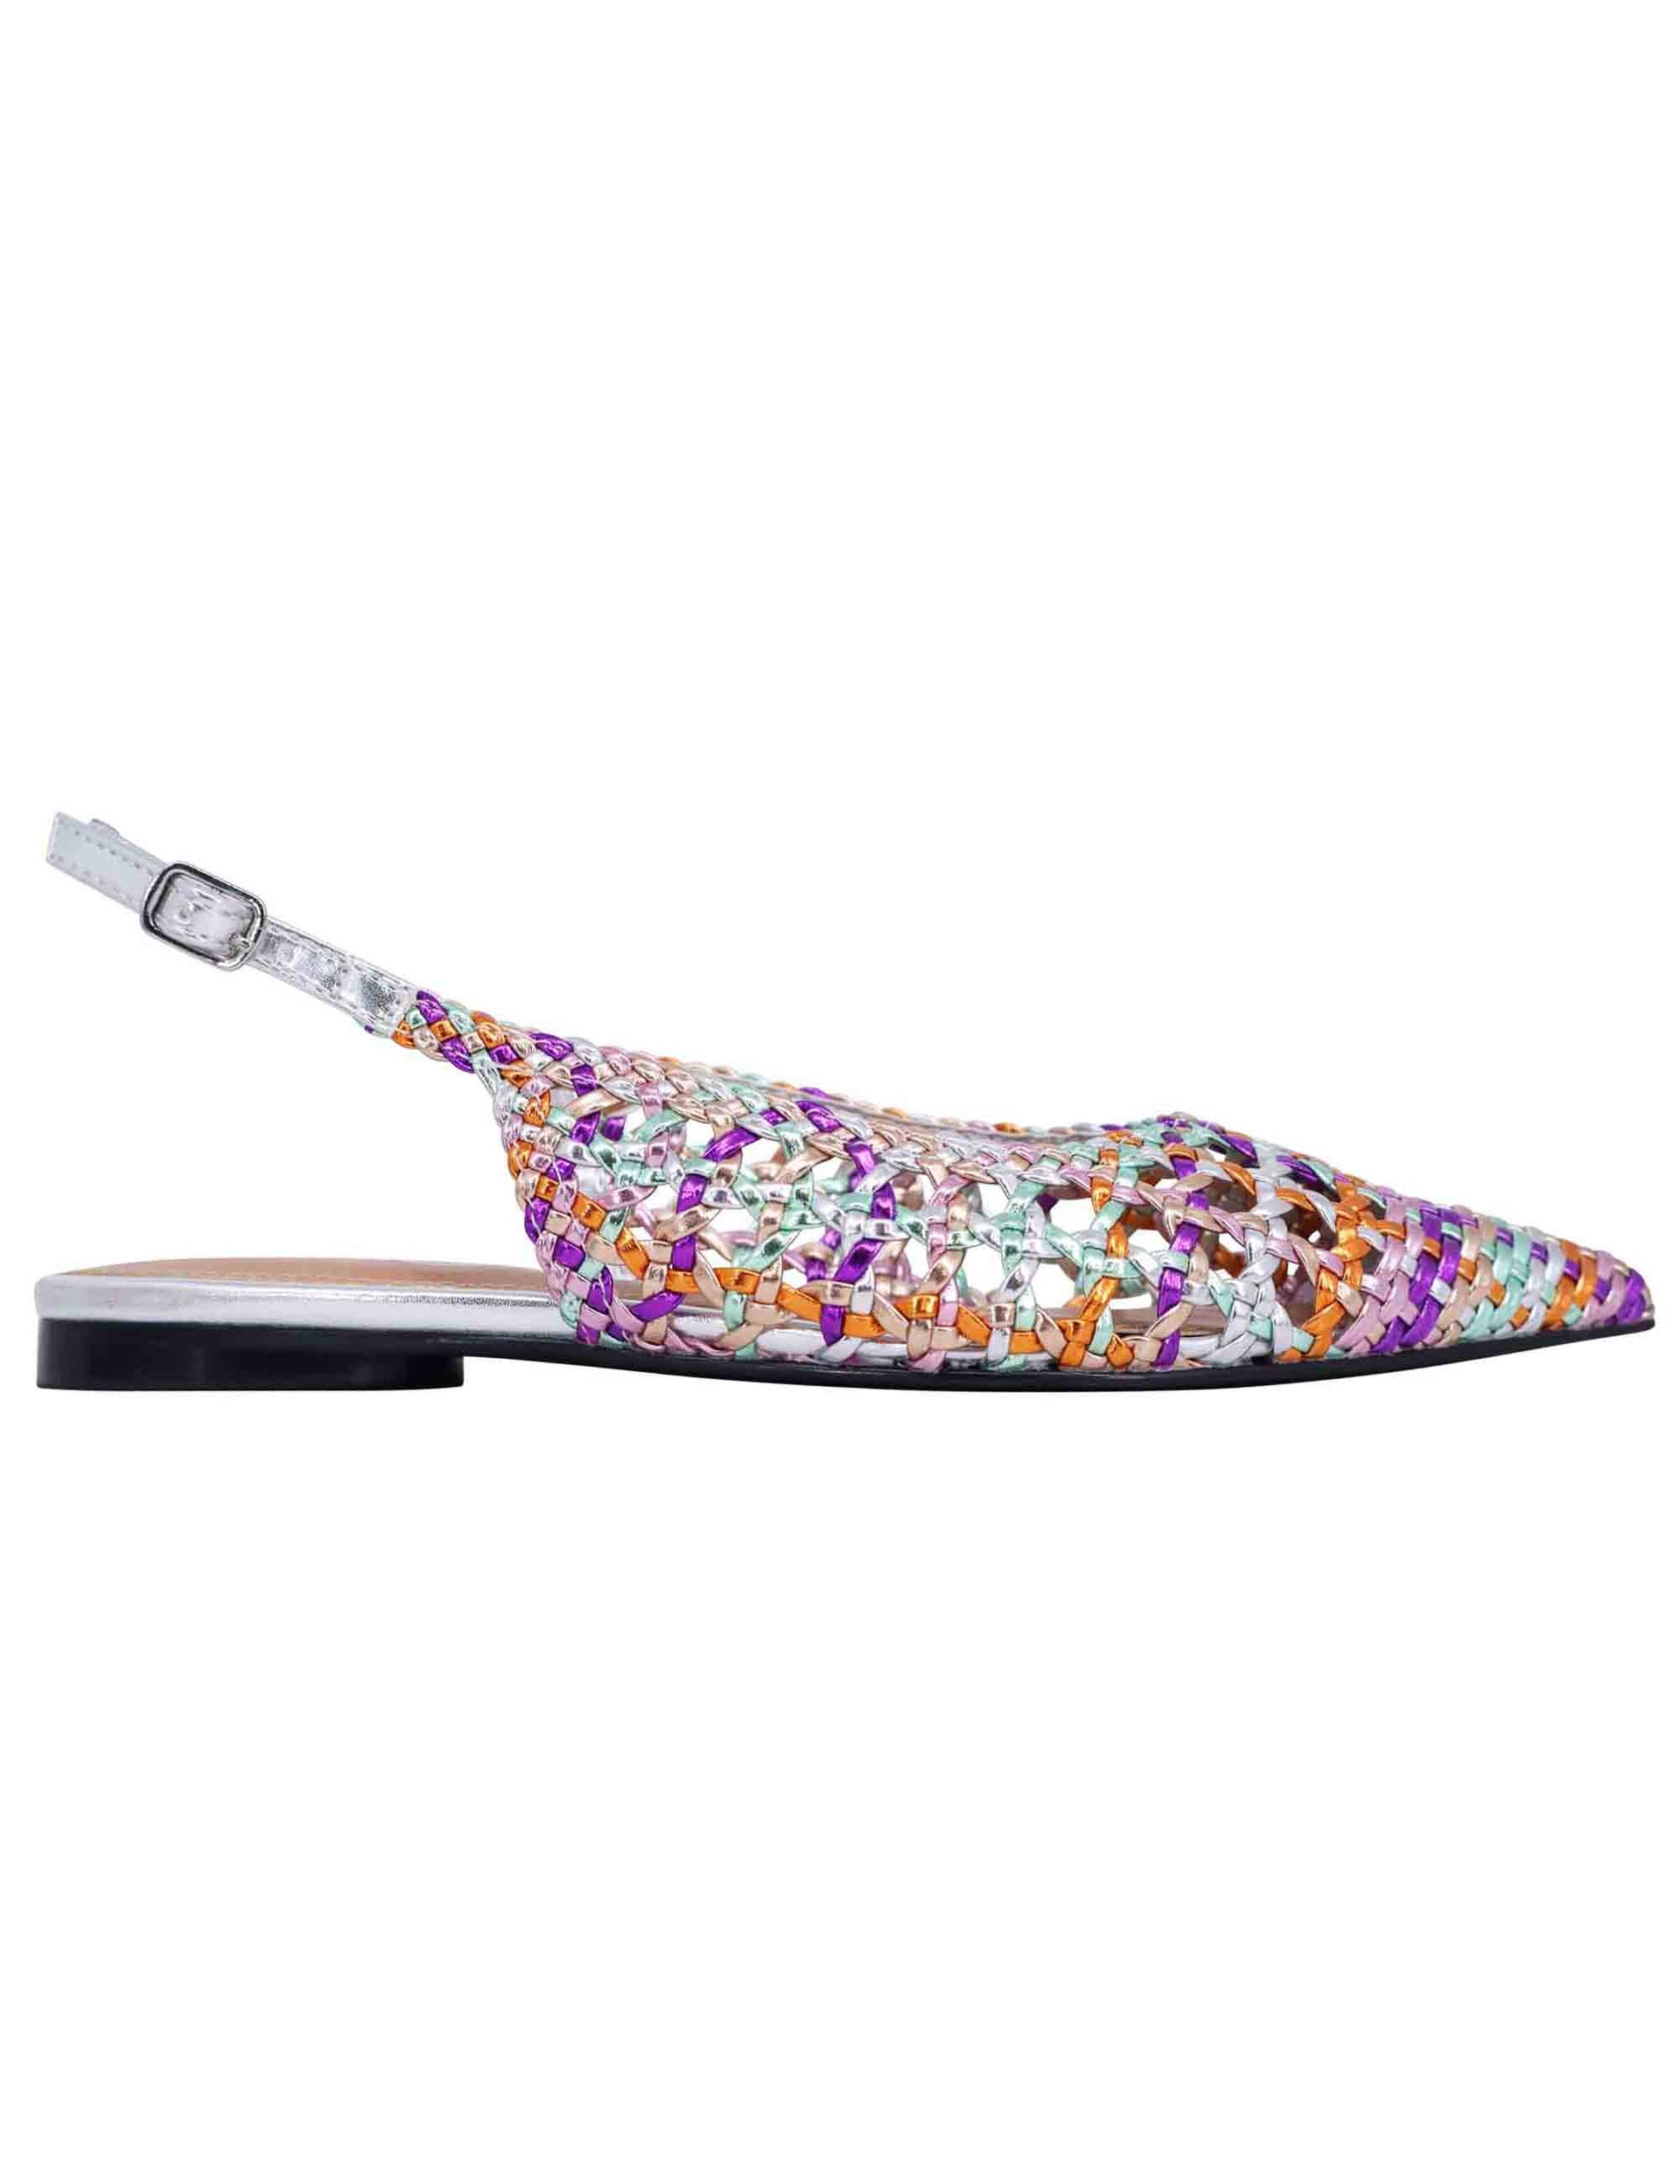 Women's slingback sandals in multicolored fuchsia laminated eco leather with low heel